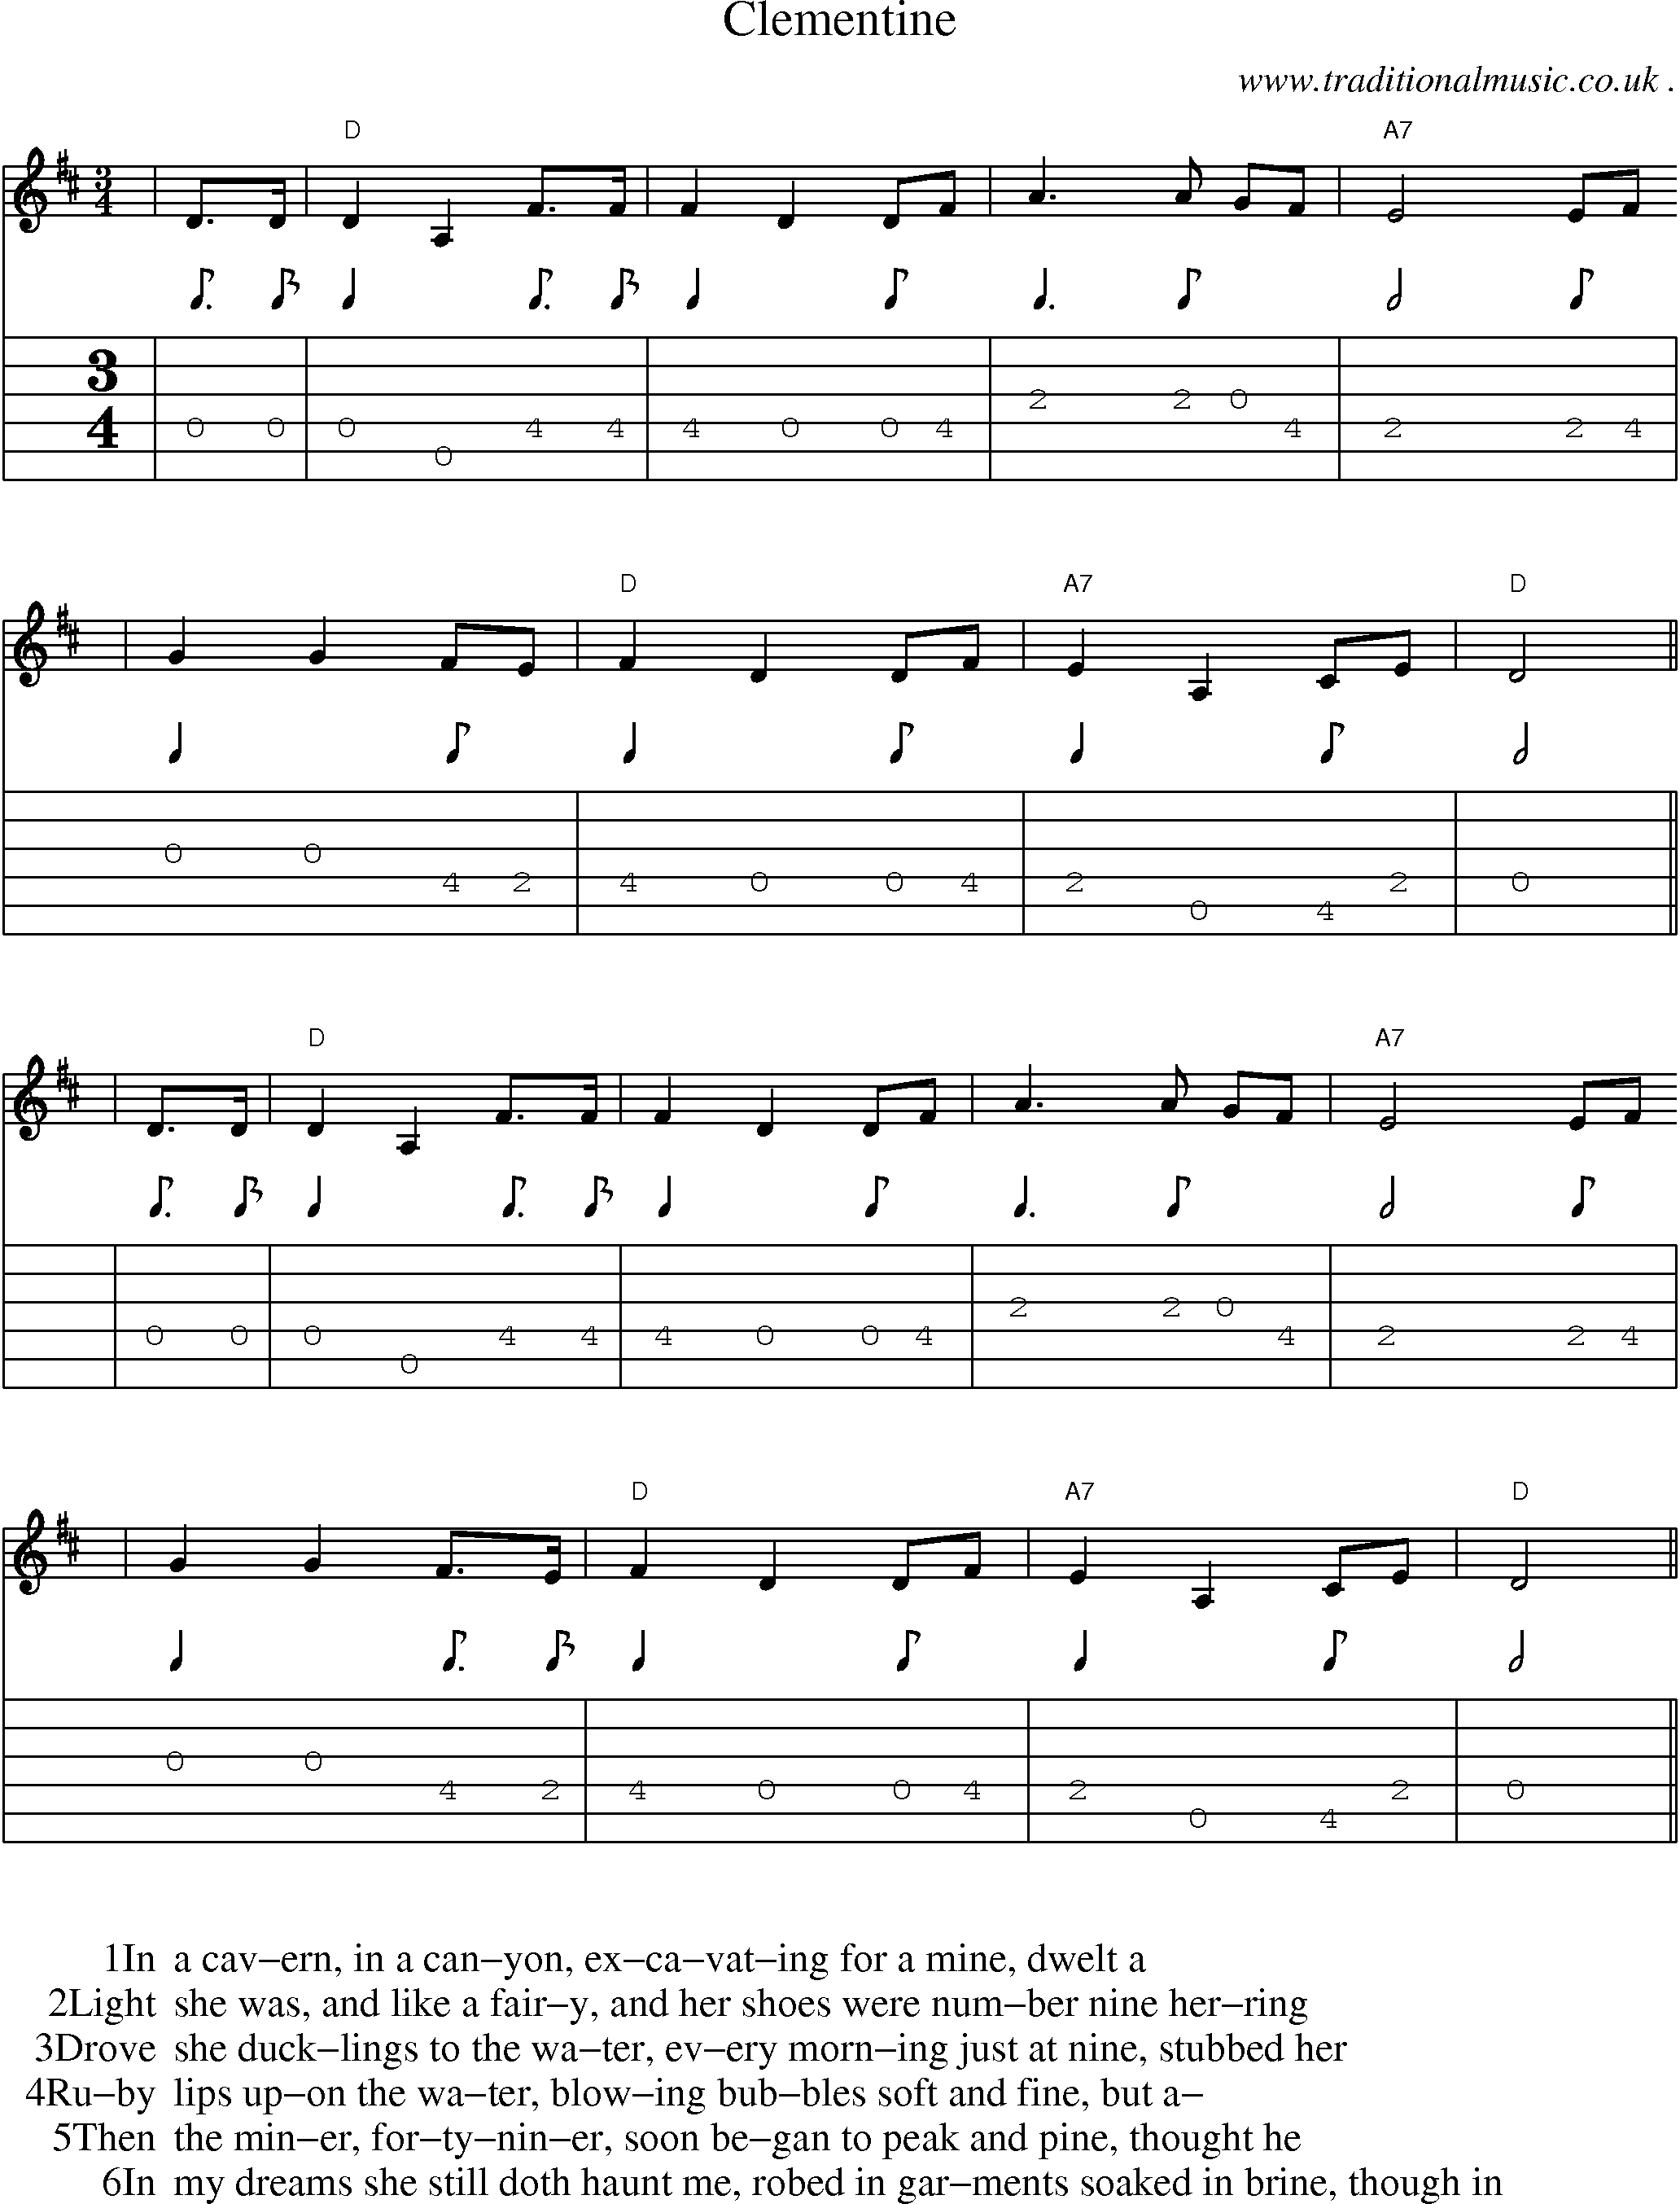 Music Score and Guitar Tabs for Clementine